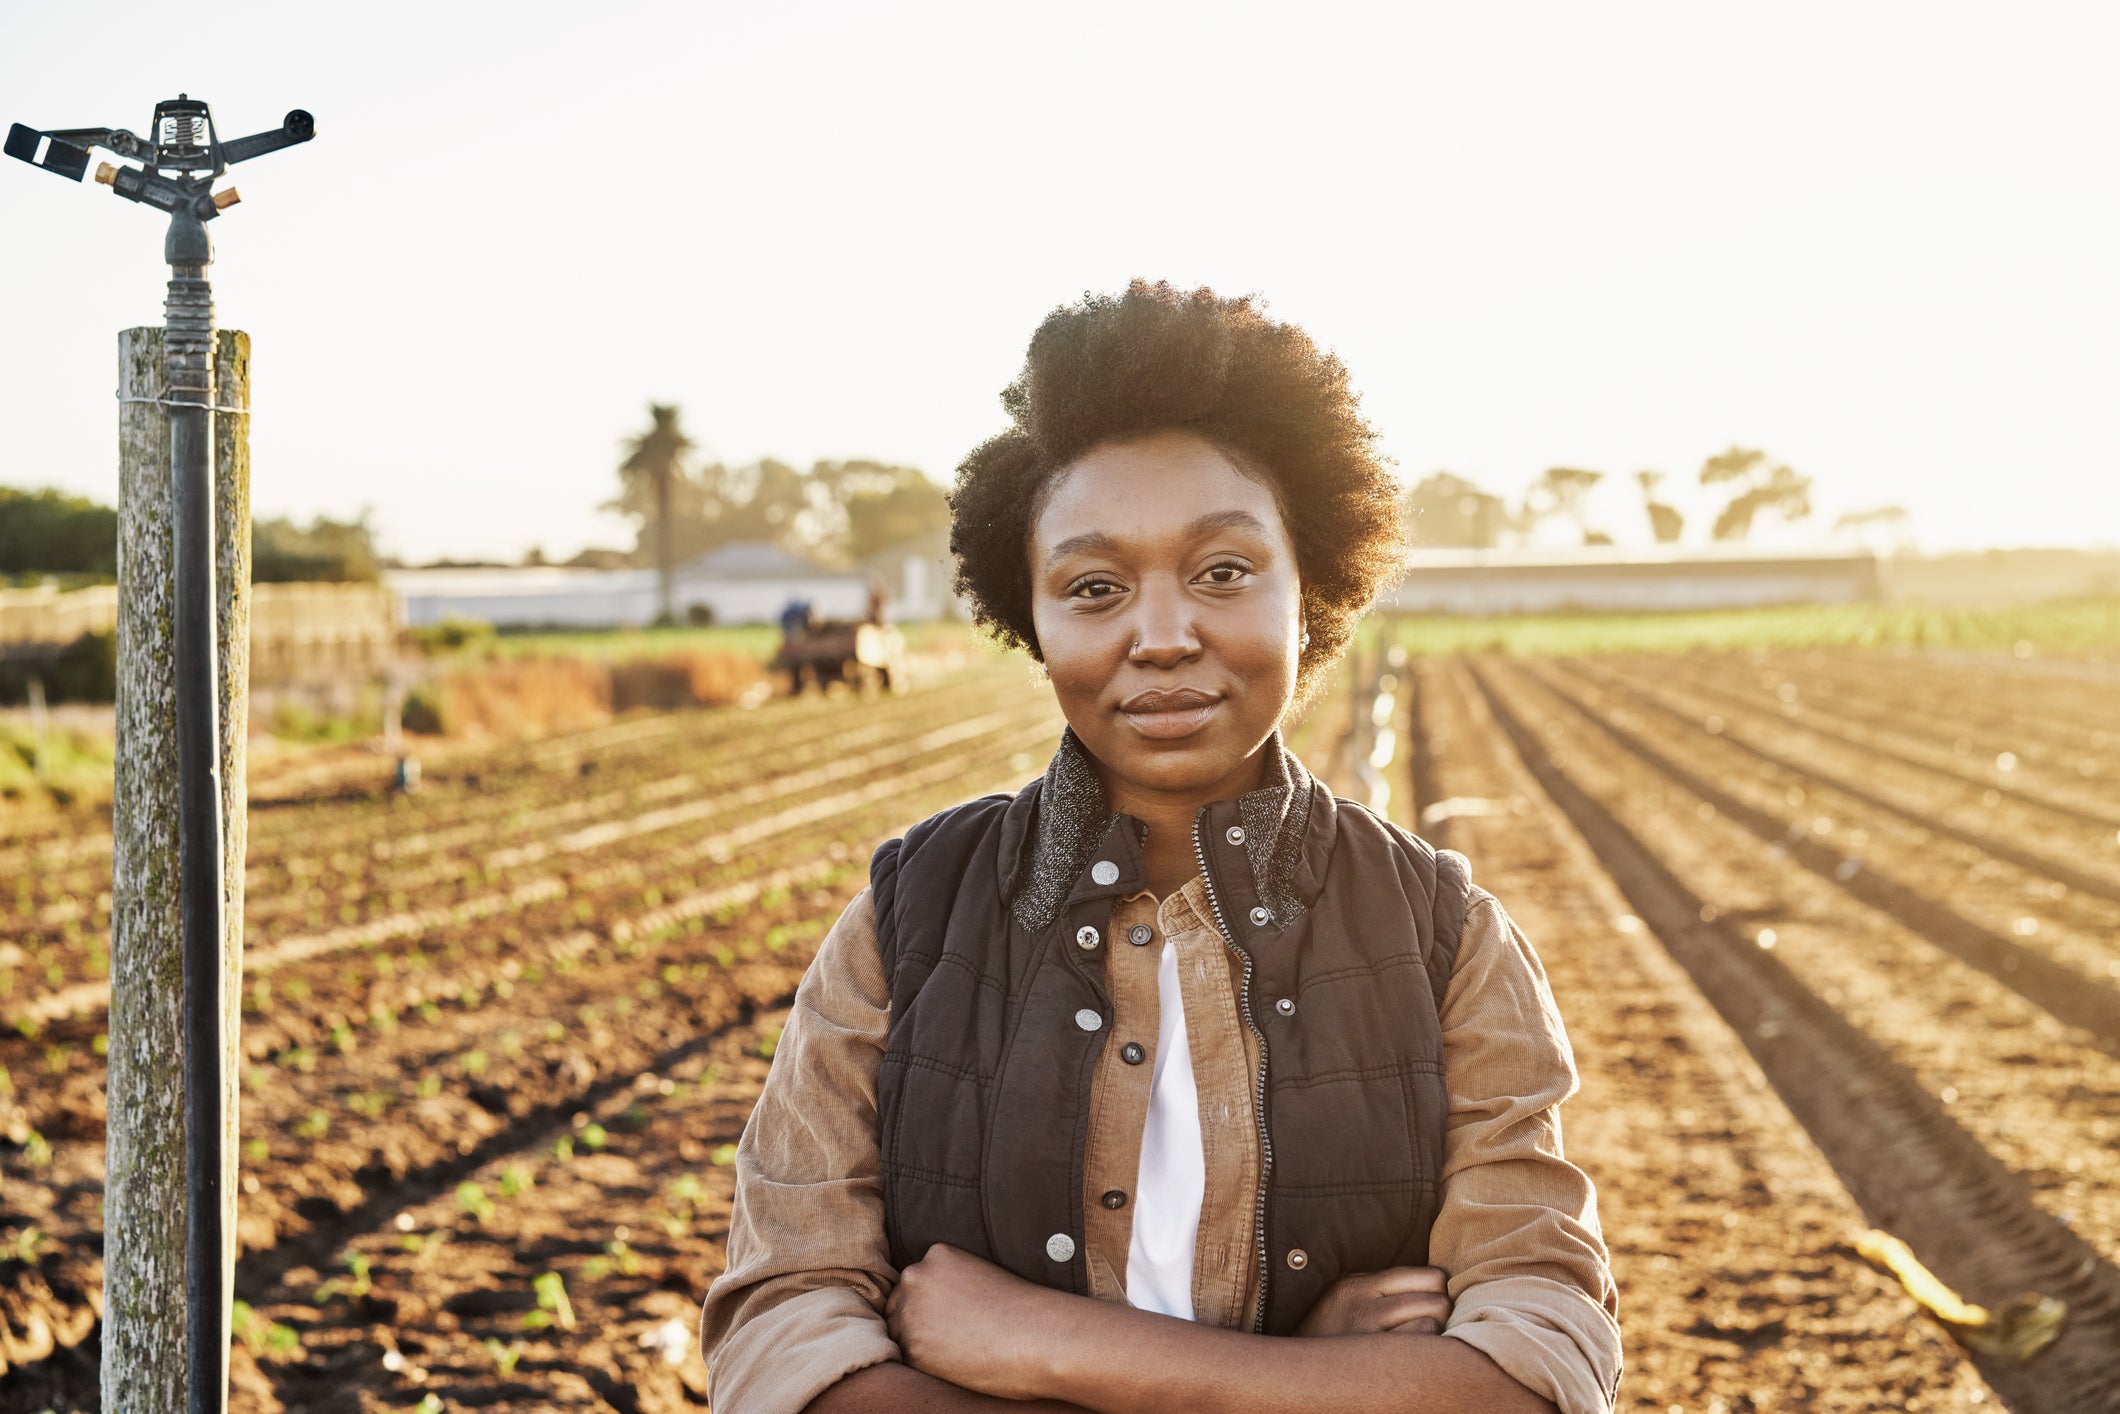 ‘The Black Farmer Fund’ Raises $11M To Change The Face Of Agriculture